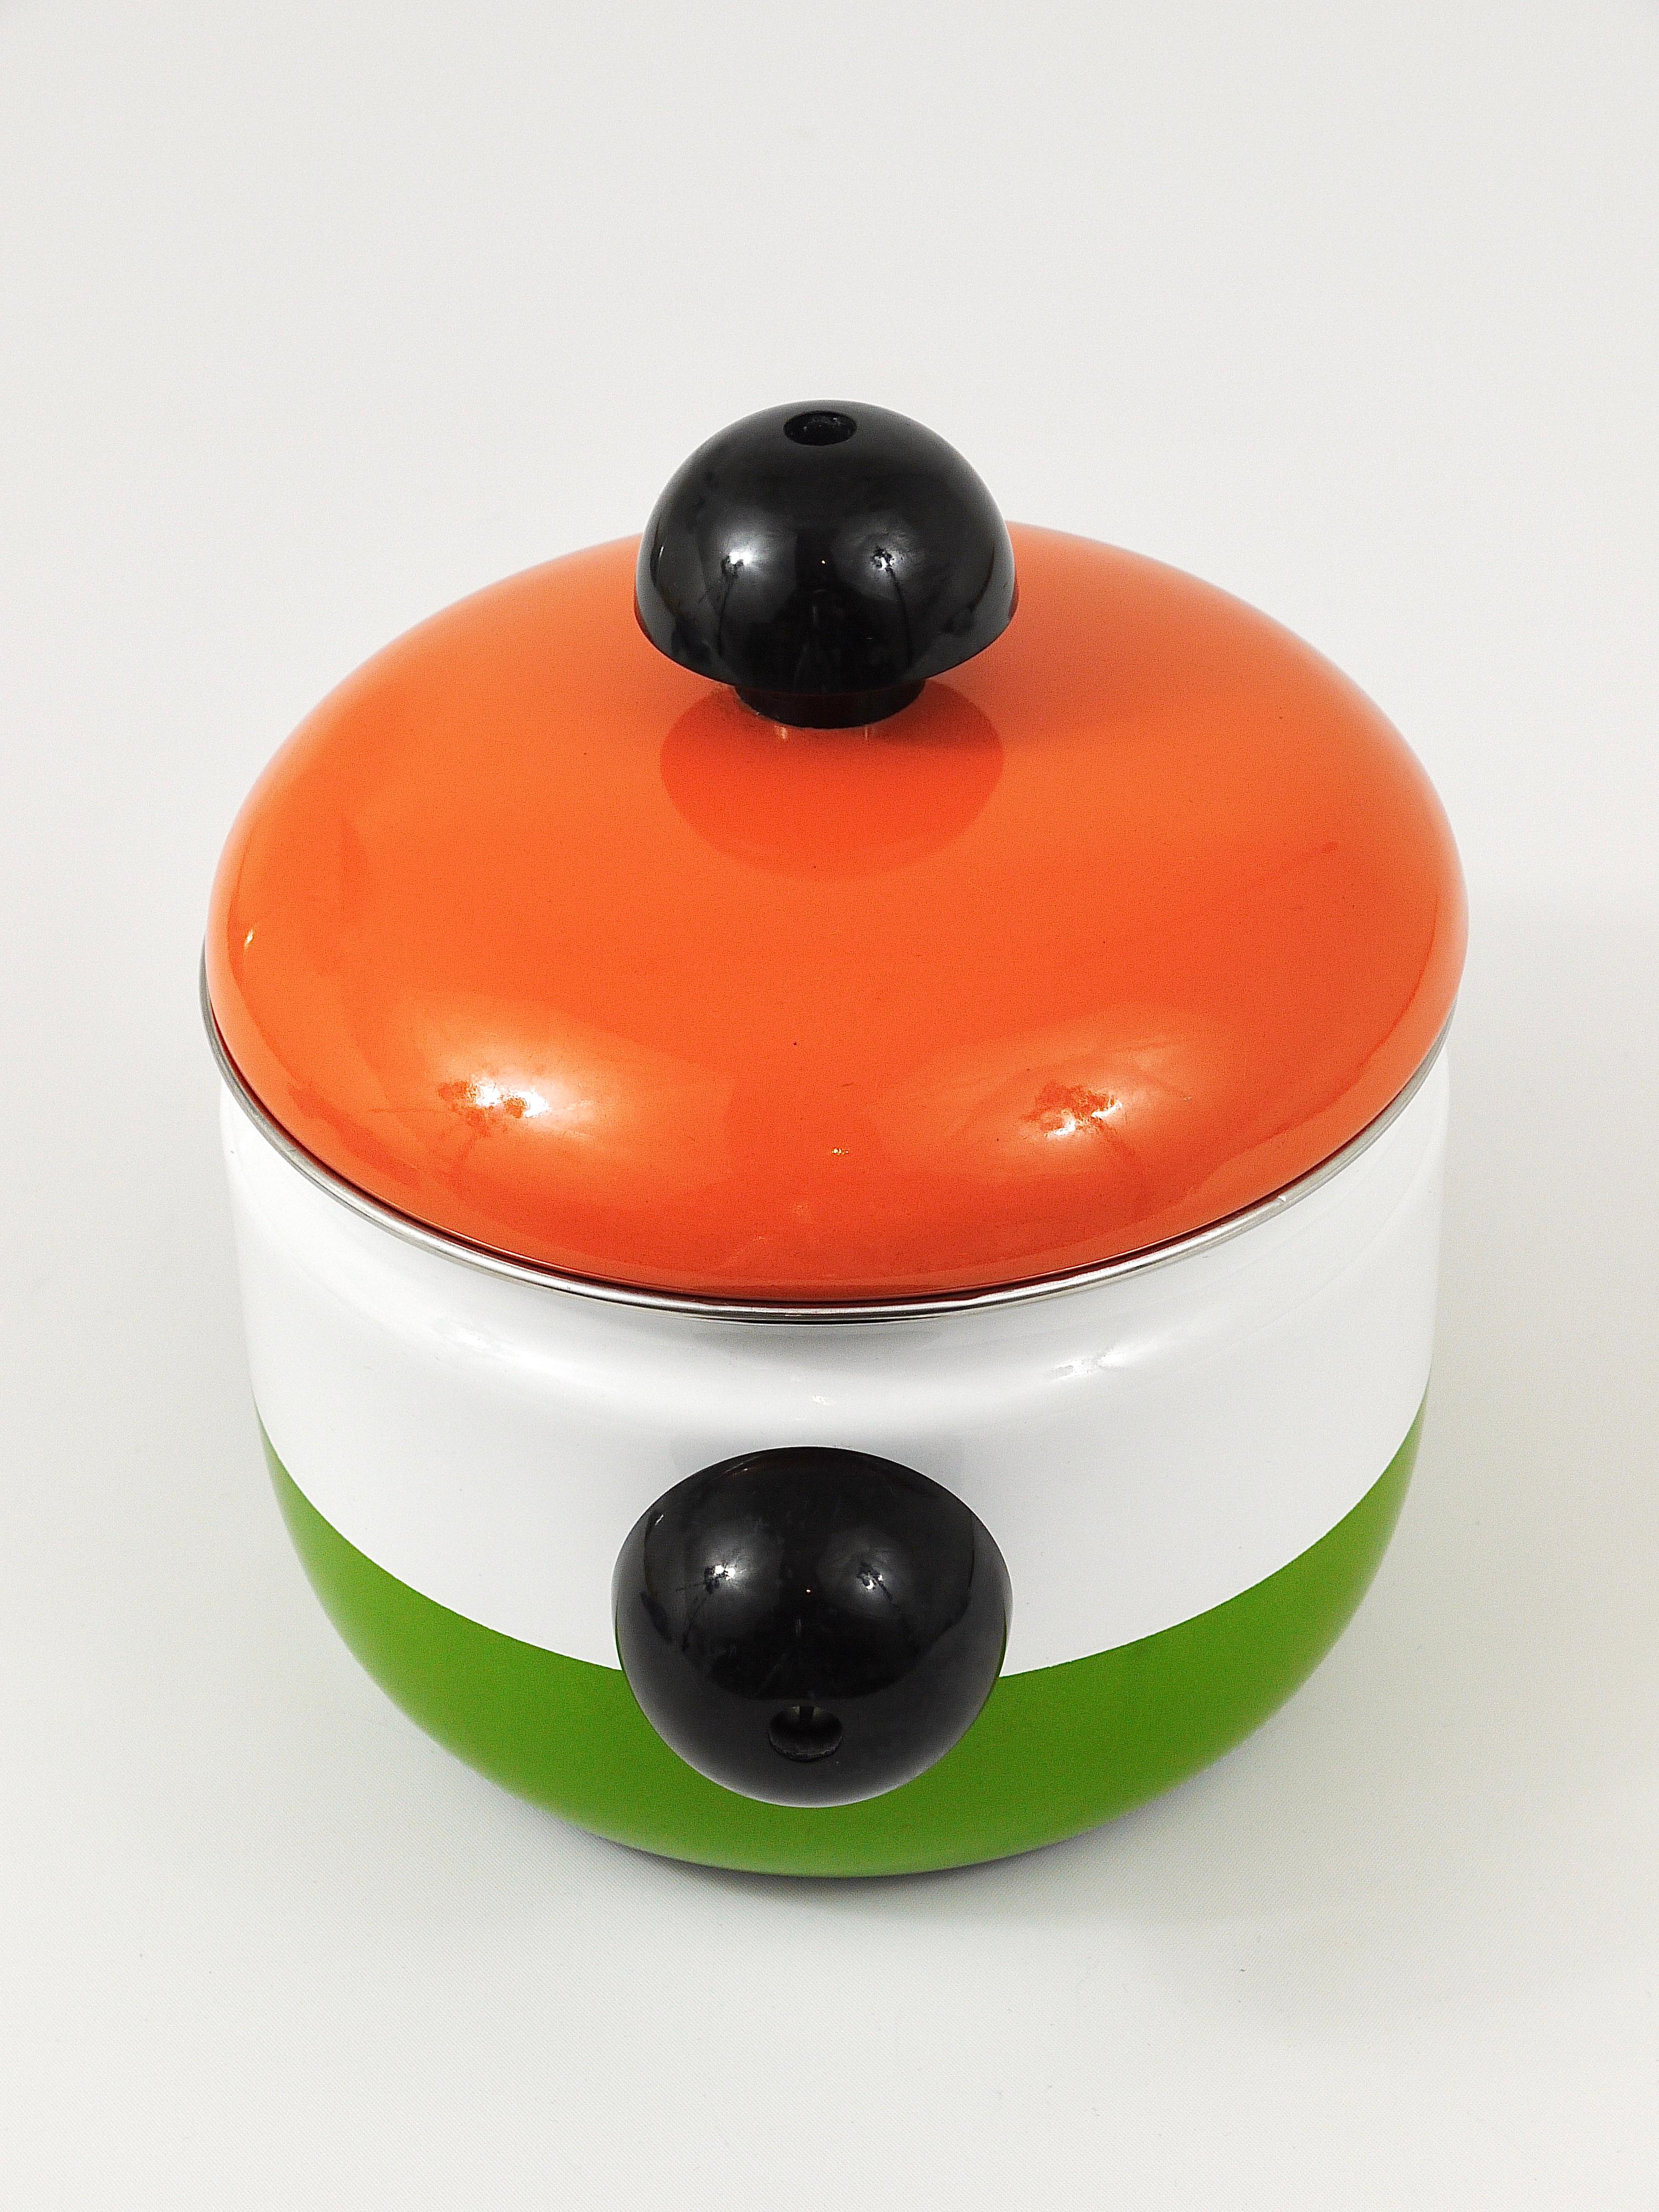 Carl Aubock Enameled Pot with Lid by Riess, Orange, White, Green, Austria, 1970s For Sale 4